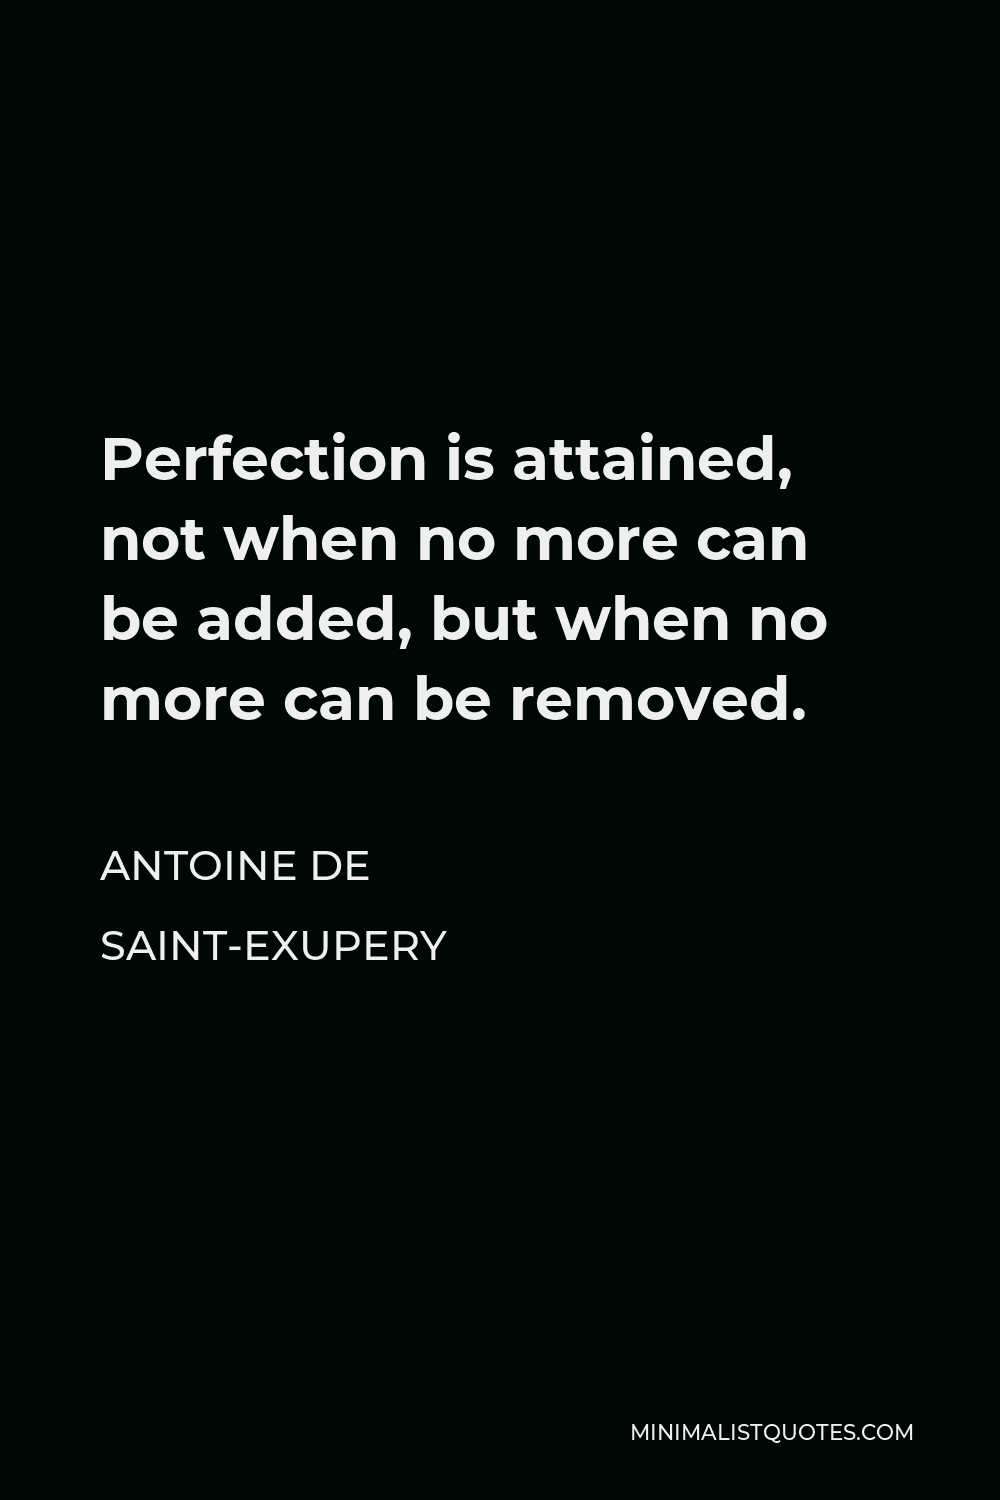 Antoine de Saint-Exupery Quote - Perfection is attained, not when no more can be added, but when no more can be removed.